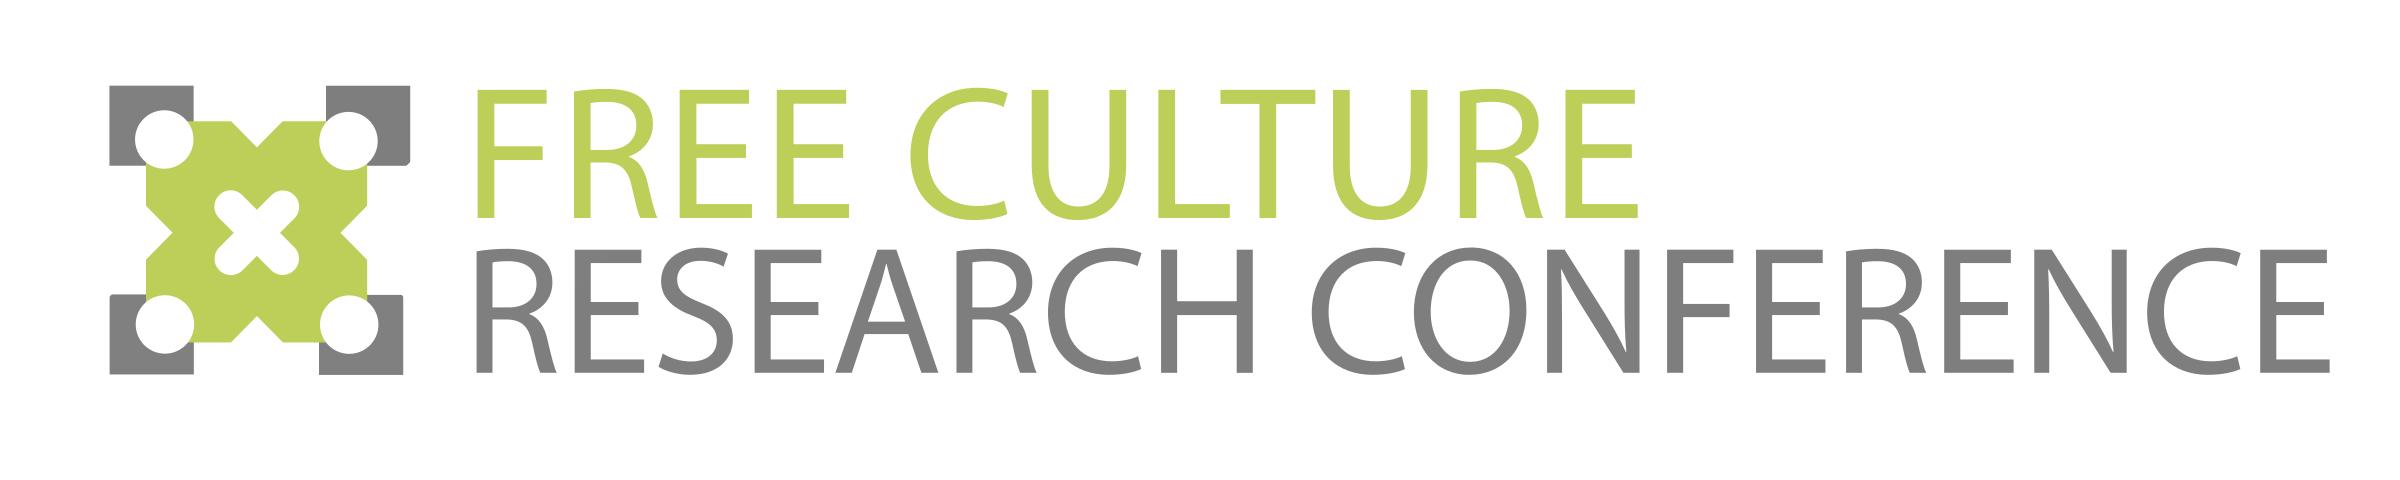 Free Culture Research Conference Logo 5 PNG icons